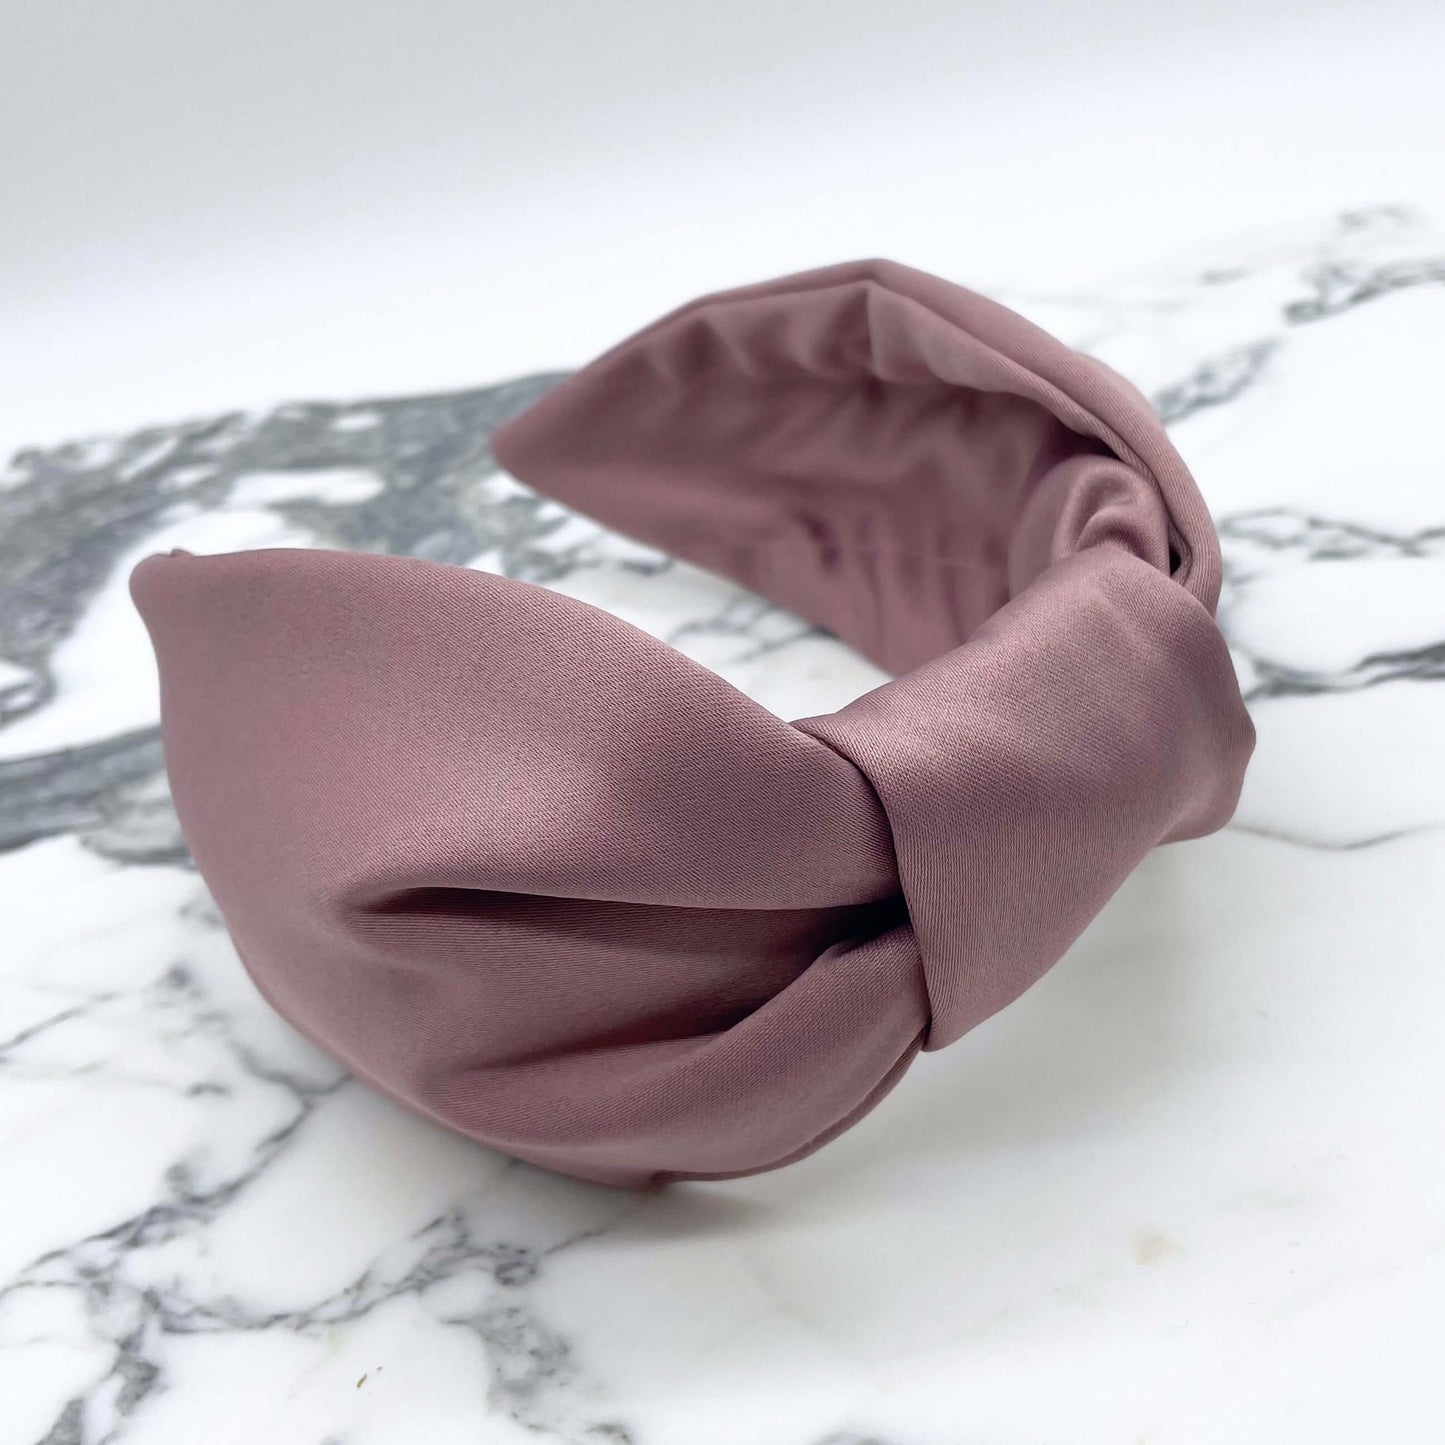 Rose pink satin knotted headband in a bow style